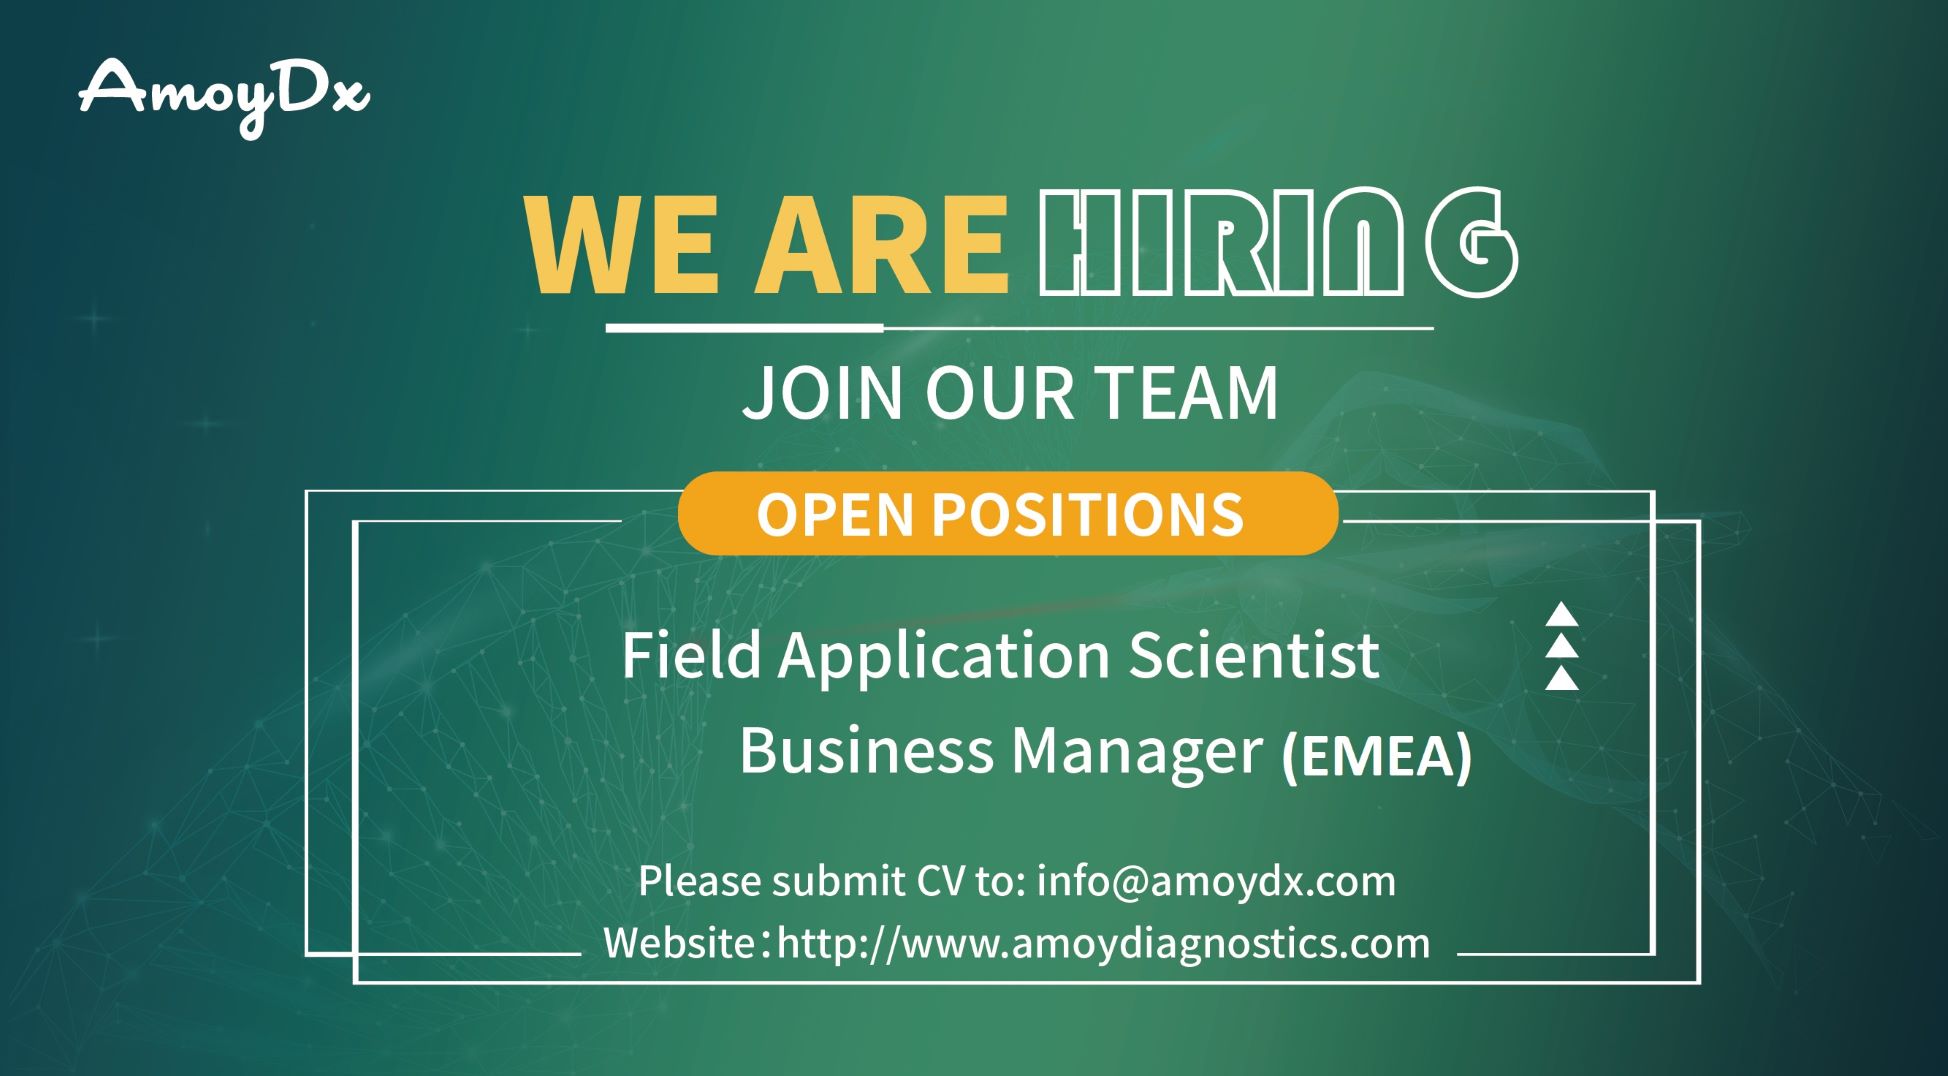 Career Opportunities - The Field Application Scientist 